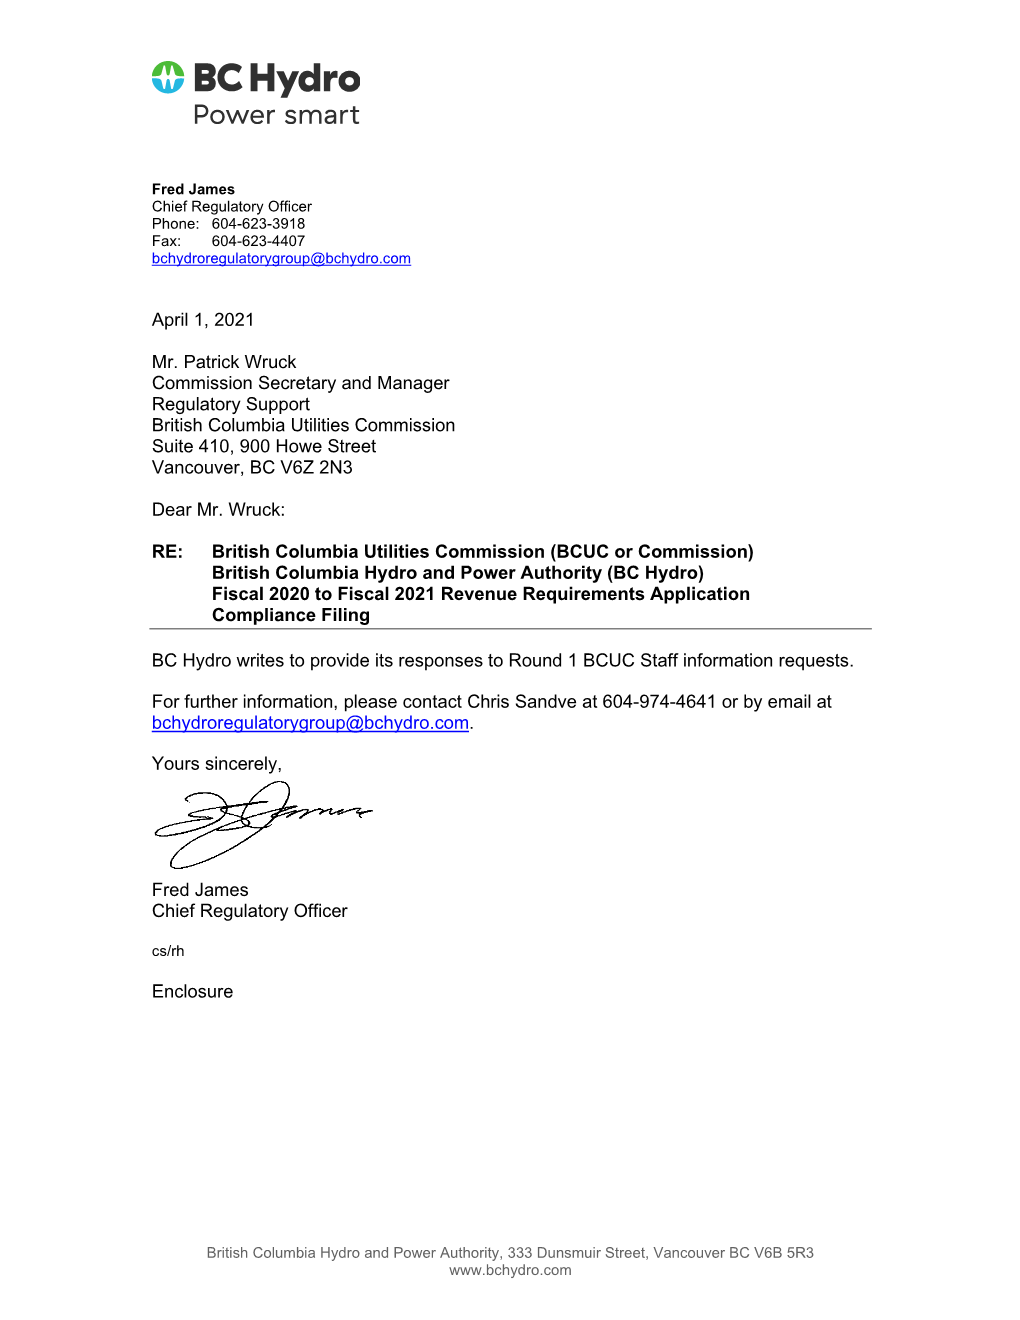 BC Hydro Responses to Round 1 BCUC Staff Information Requests